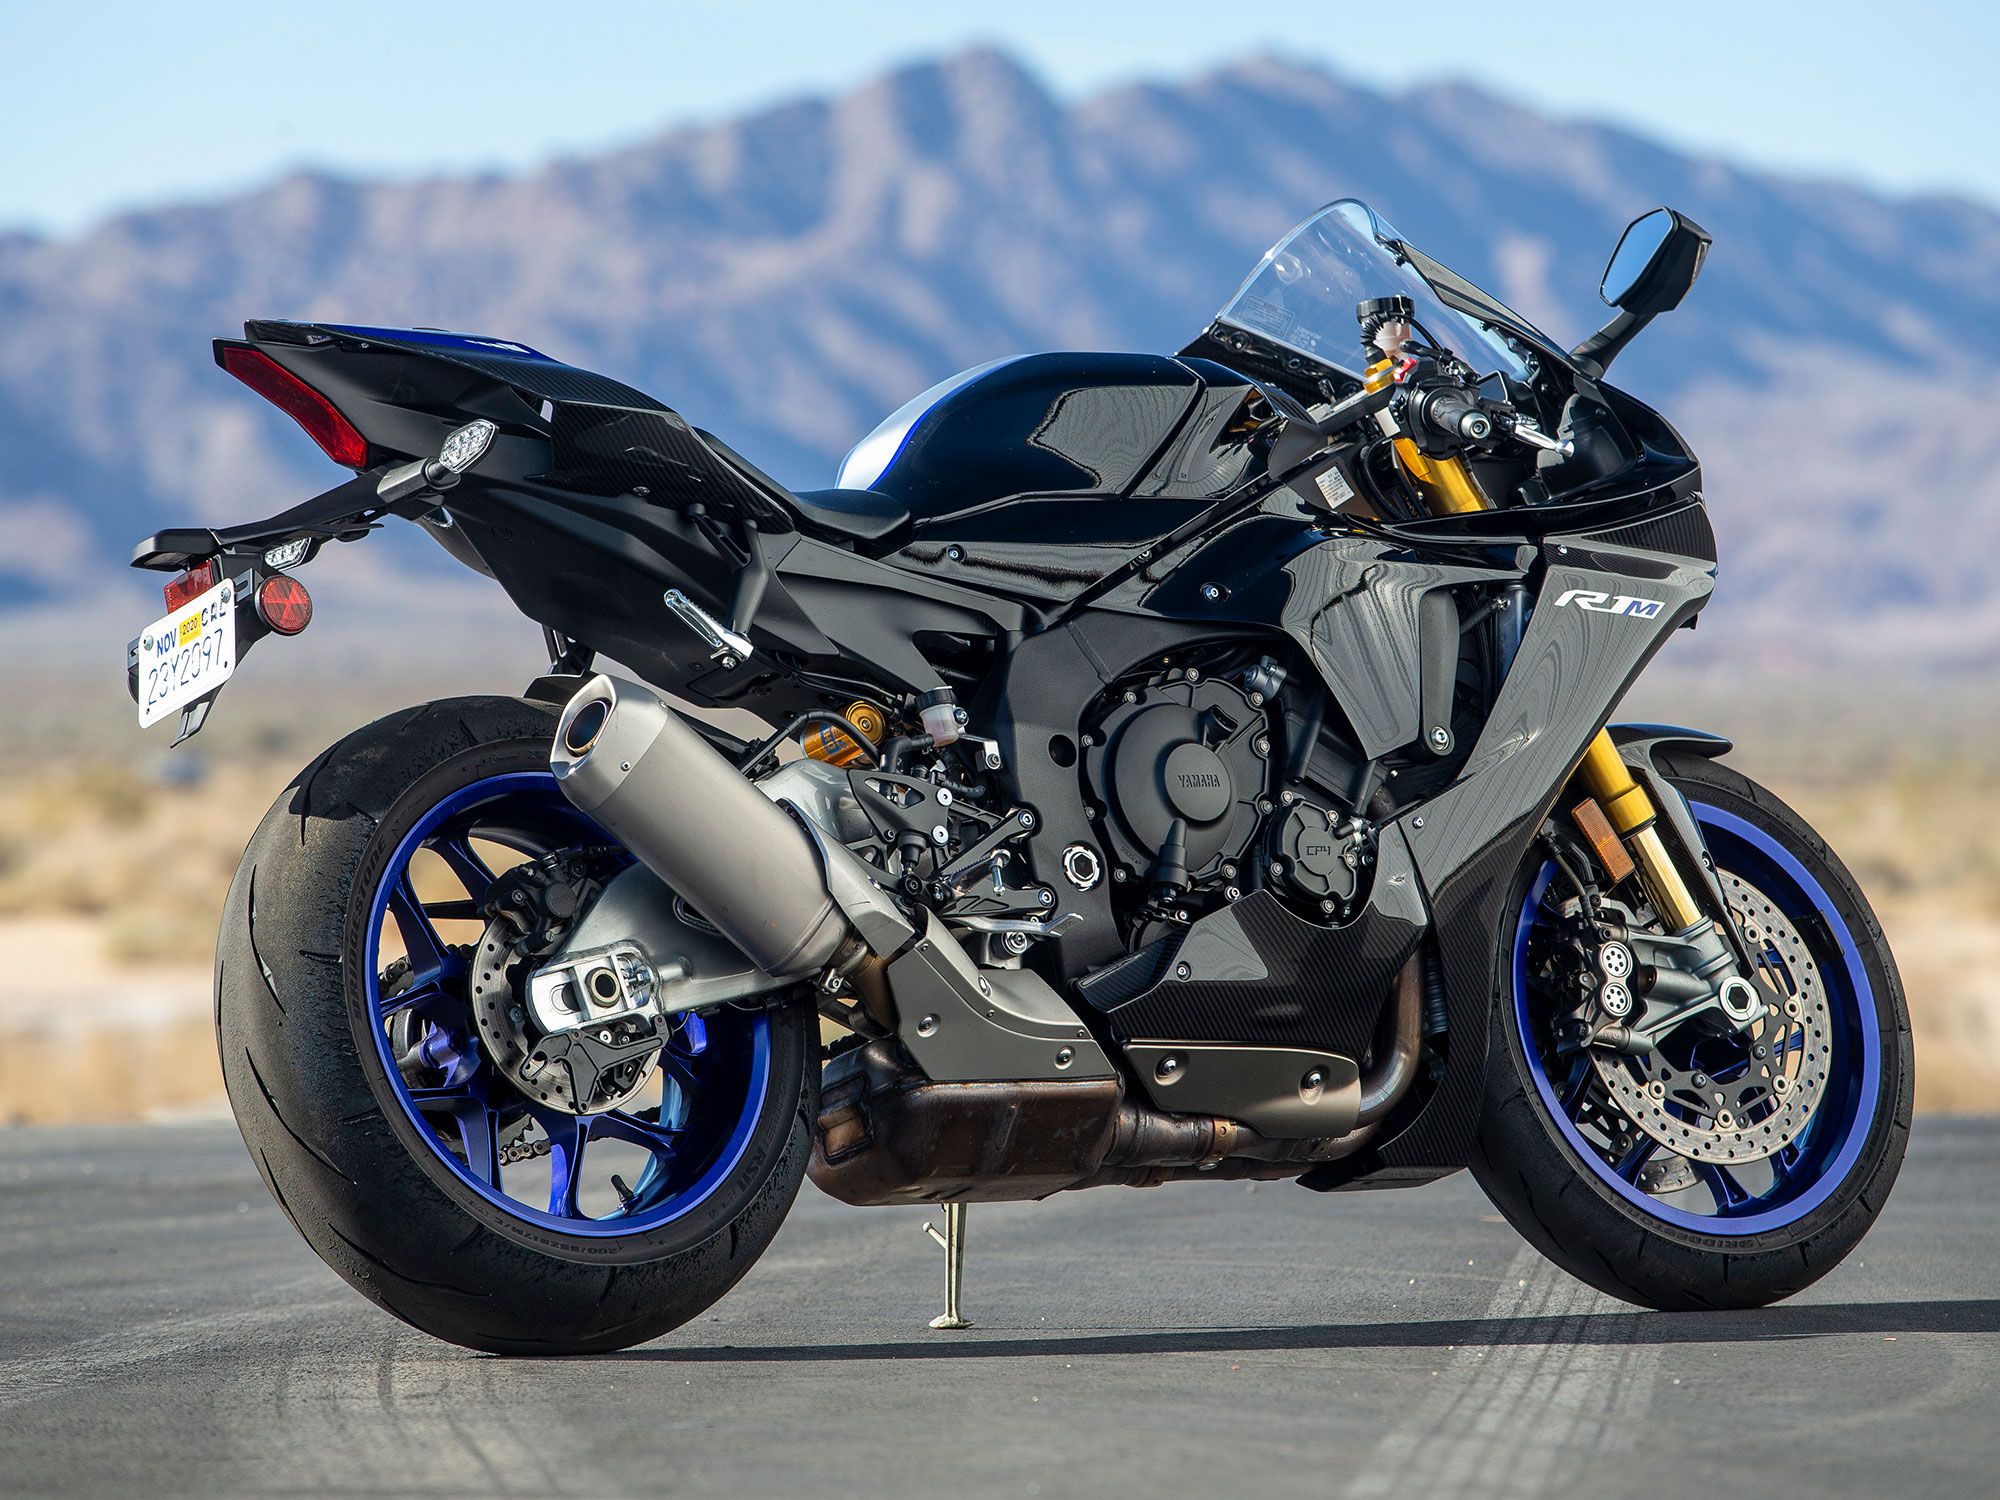 The Tuning Fork brand pairs exclusivity with performance, and function with its ‘21 YZF-R1M superbike.